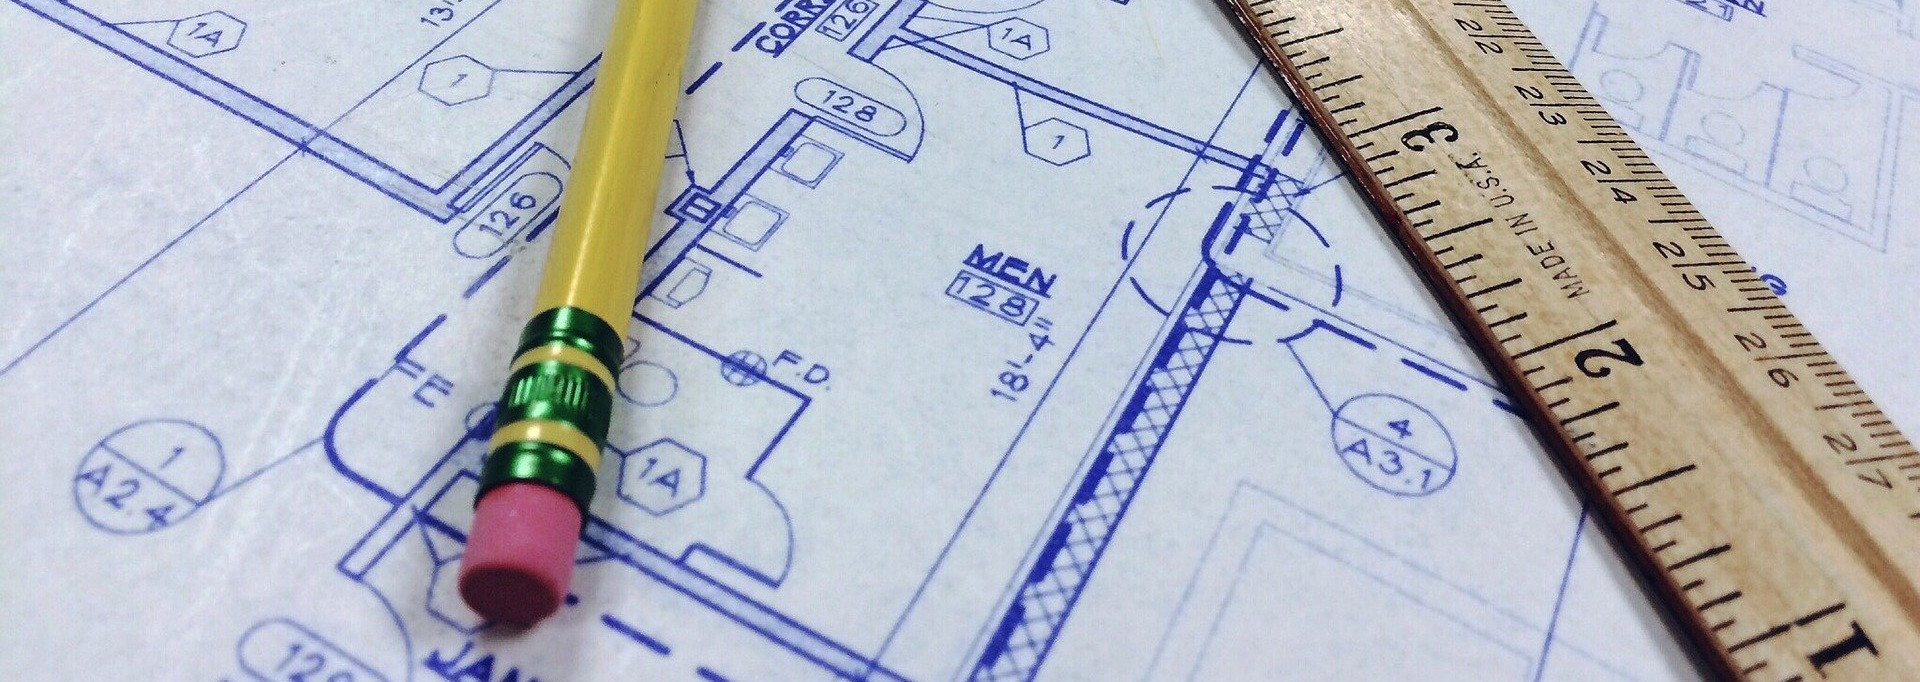 A blueprint, with a pencil and a ruler laid on top.